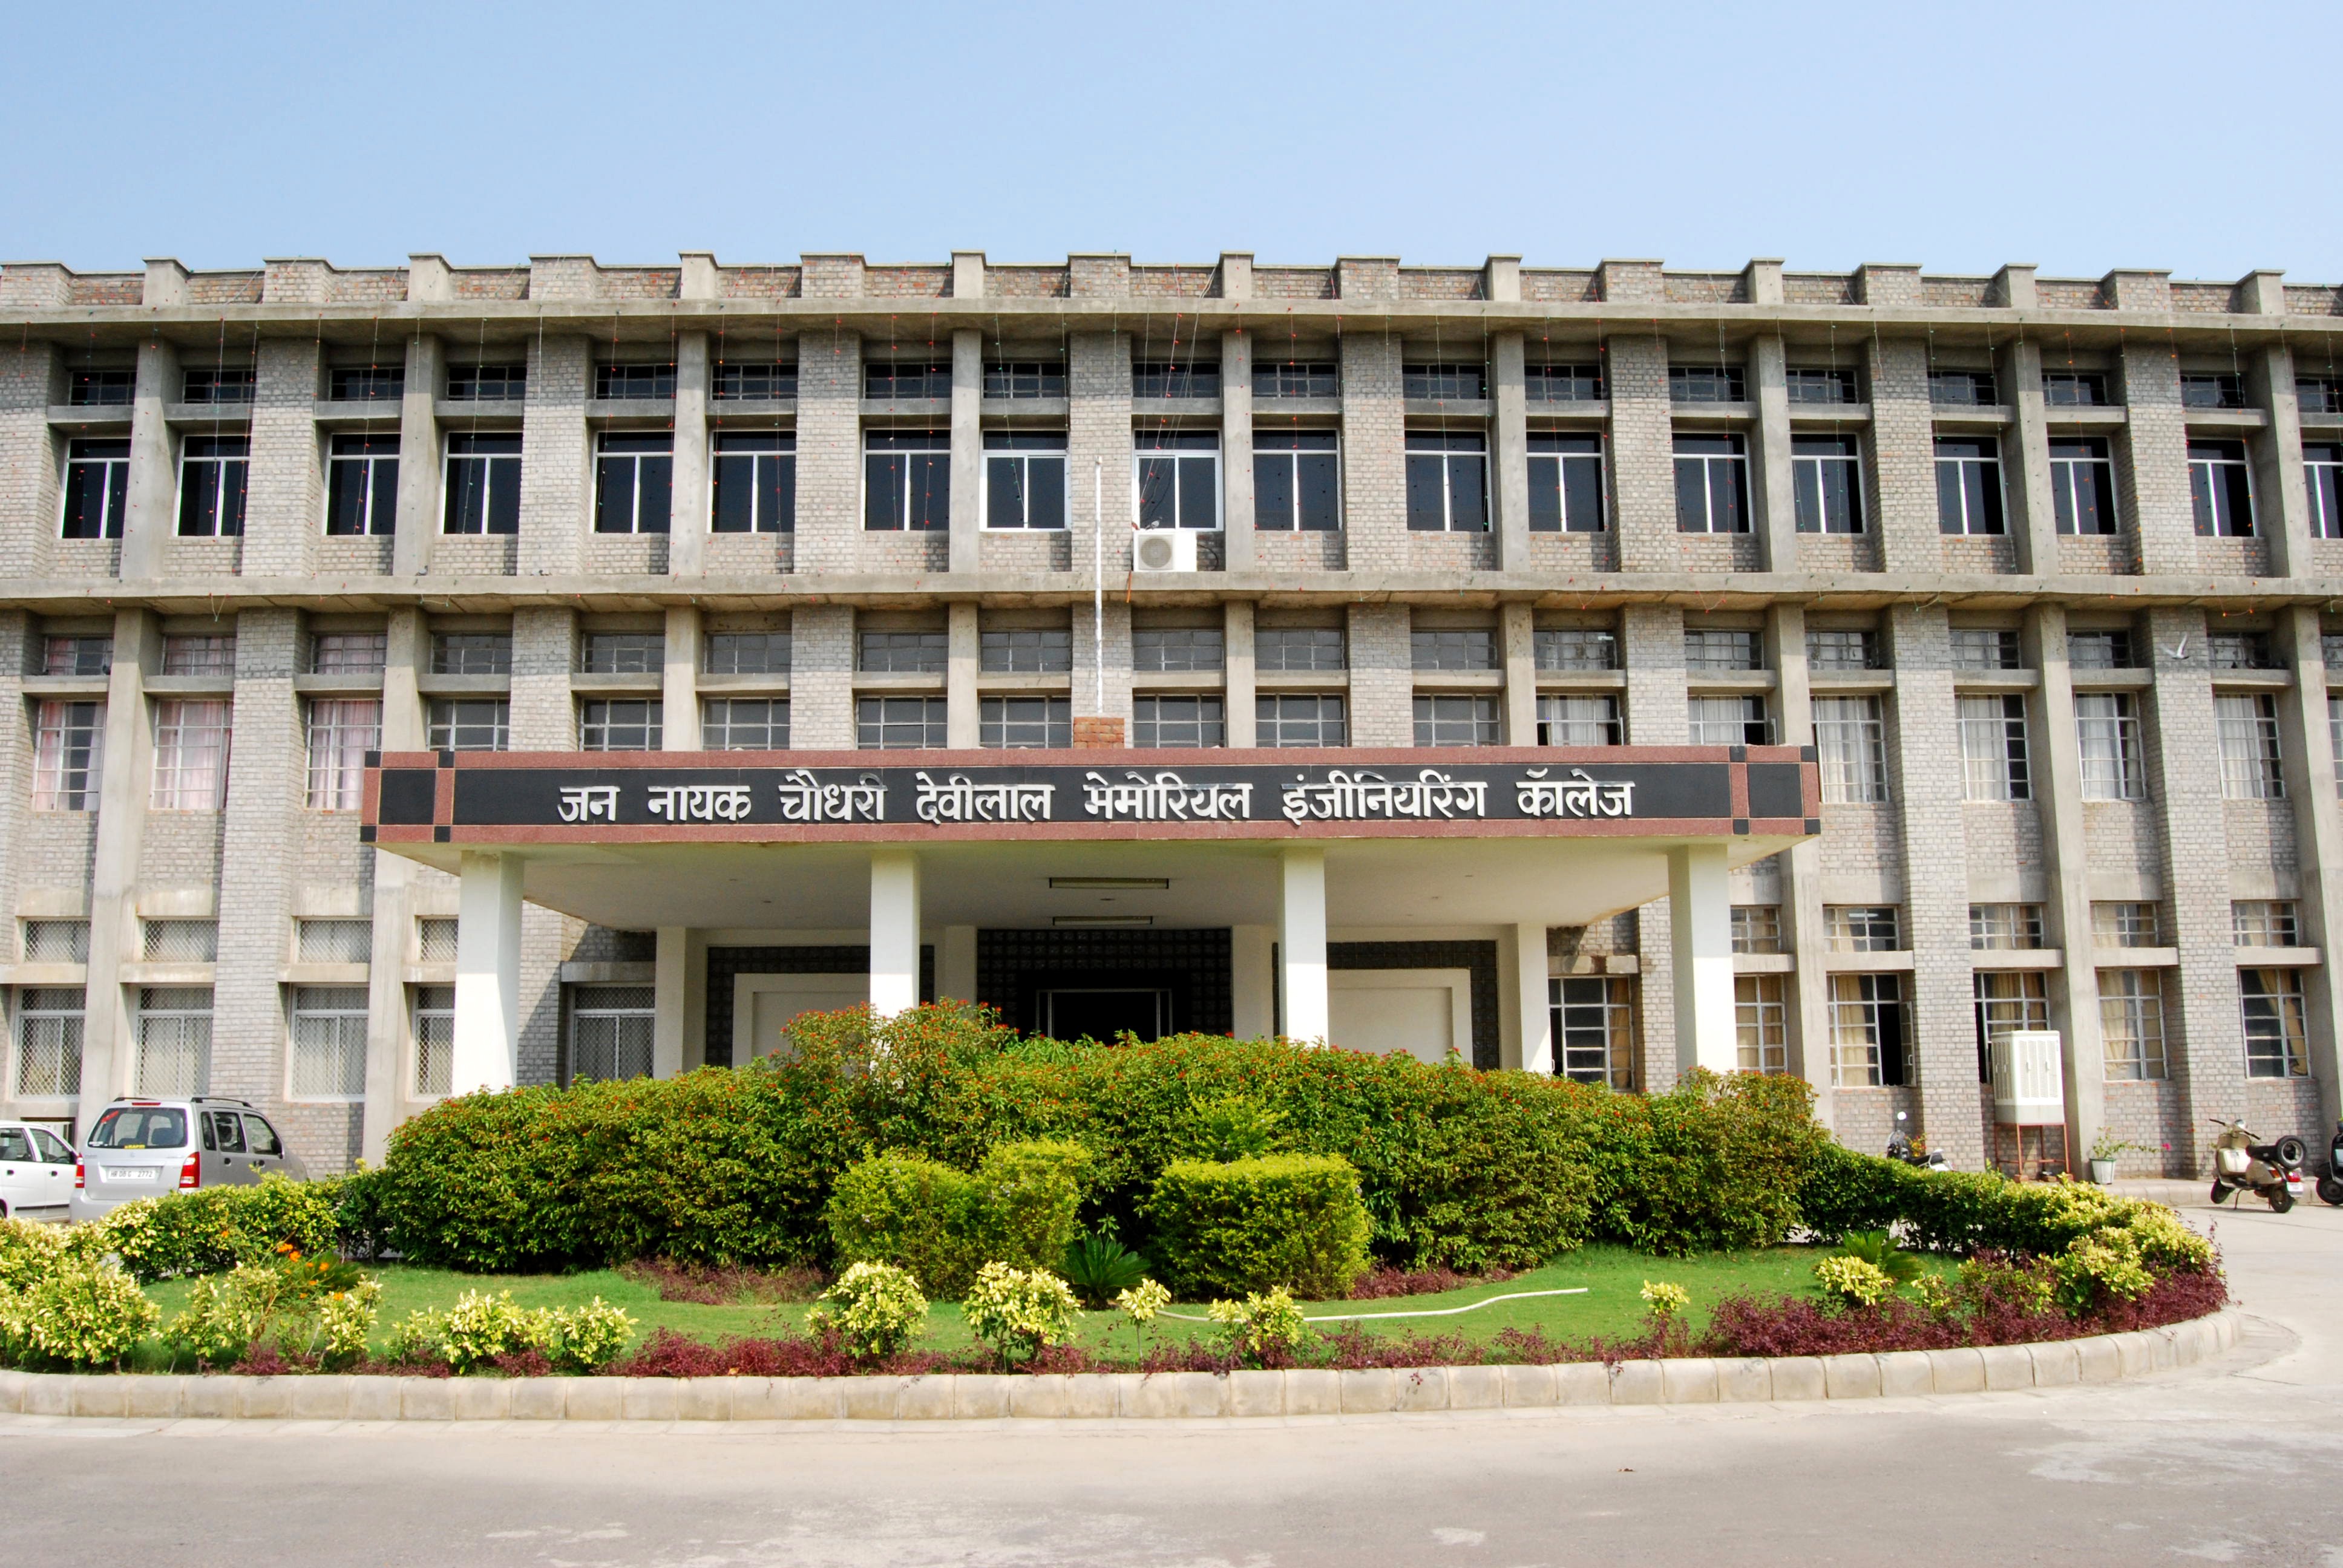 M.Tech. Courses starting from this session – JCDM Engineering College, Sirsa